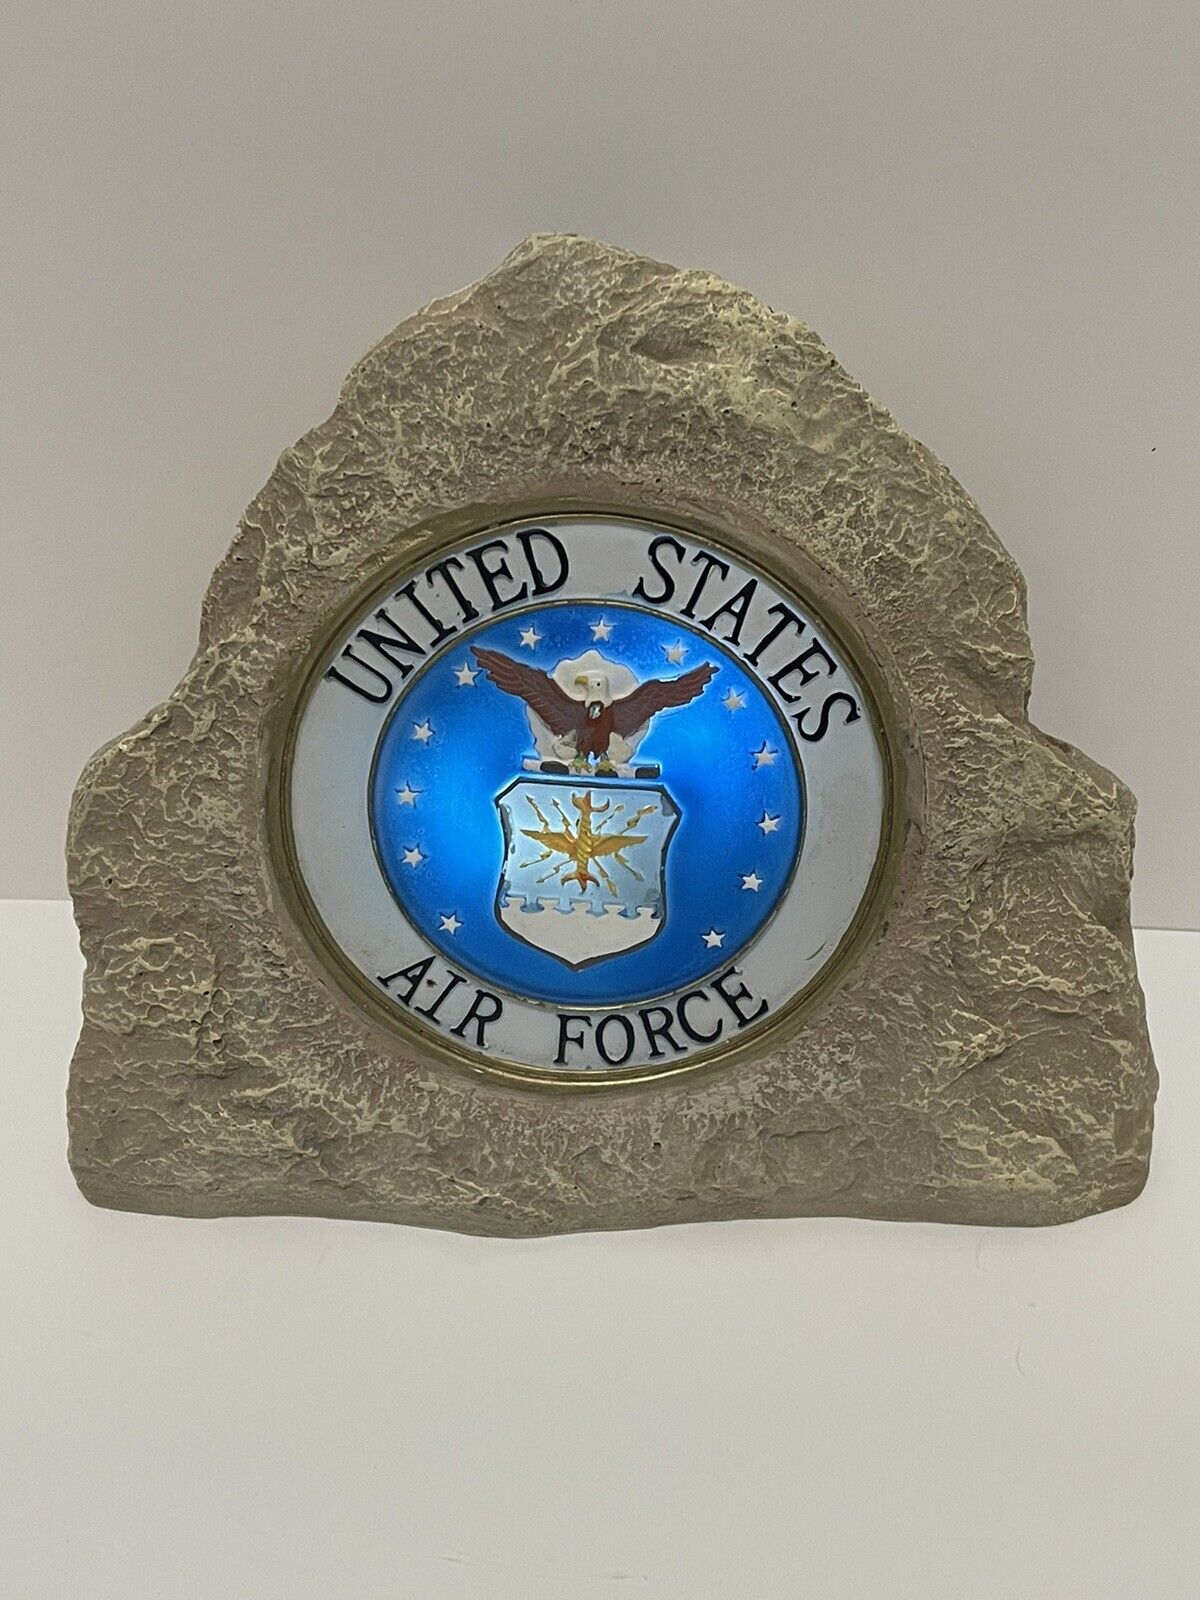 United States Air Force Garden Stone - faux stone - solar powered